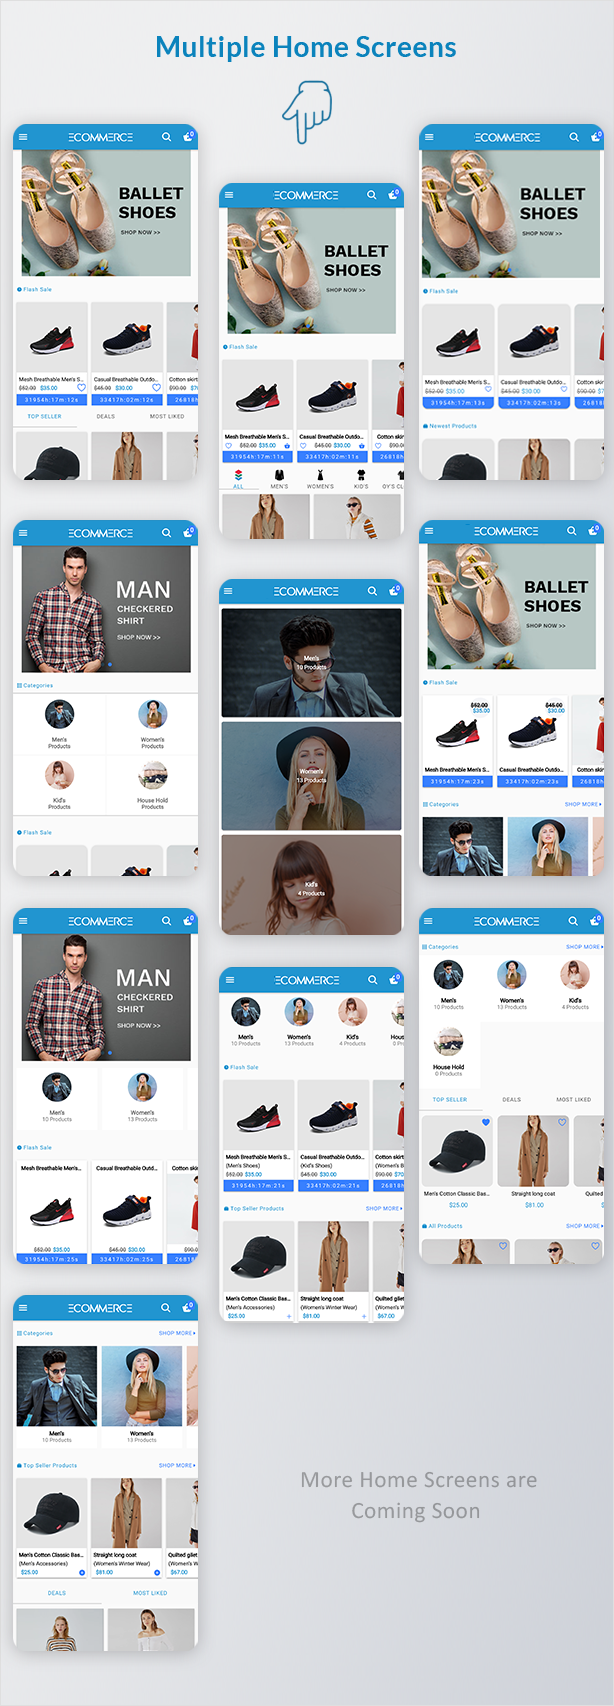 React Ecommerce - Universal iOS & Android Ecommerce / Store Full Mobile App with PHP Laravel CMS - 6